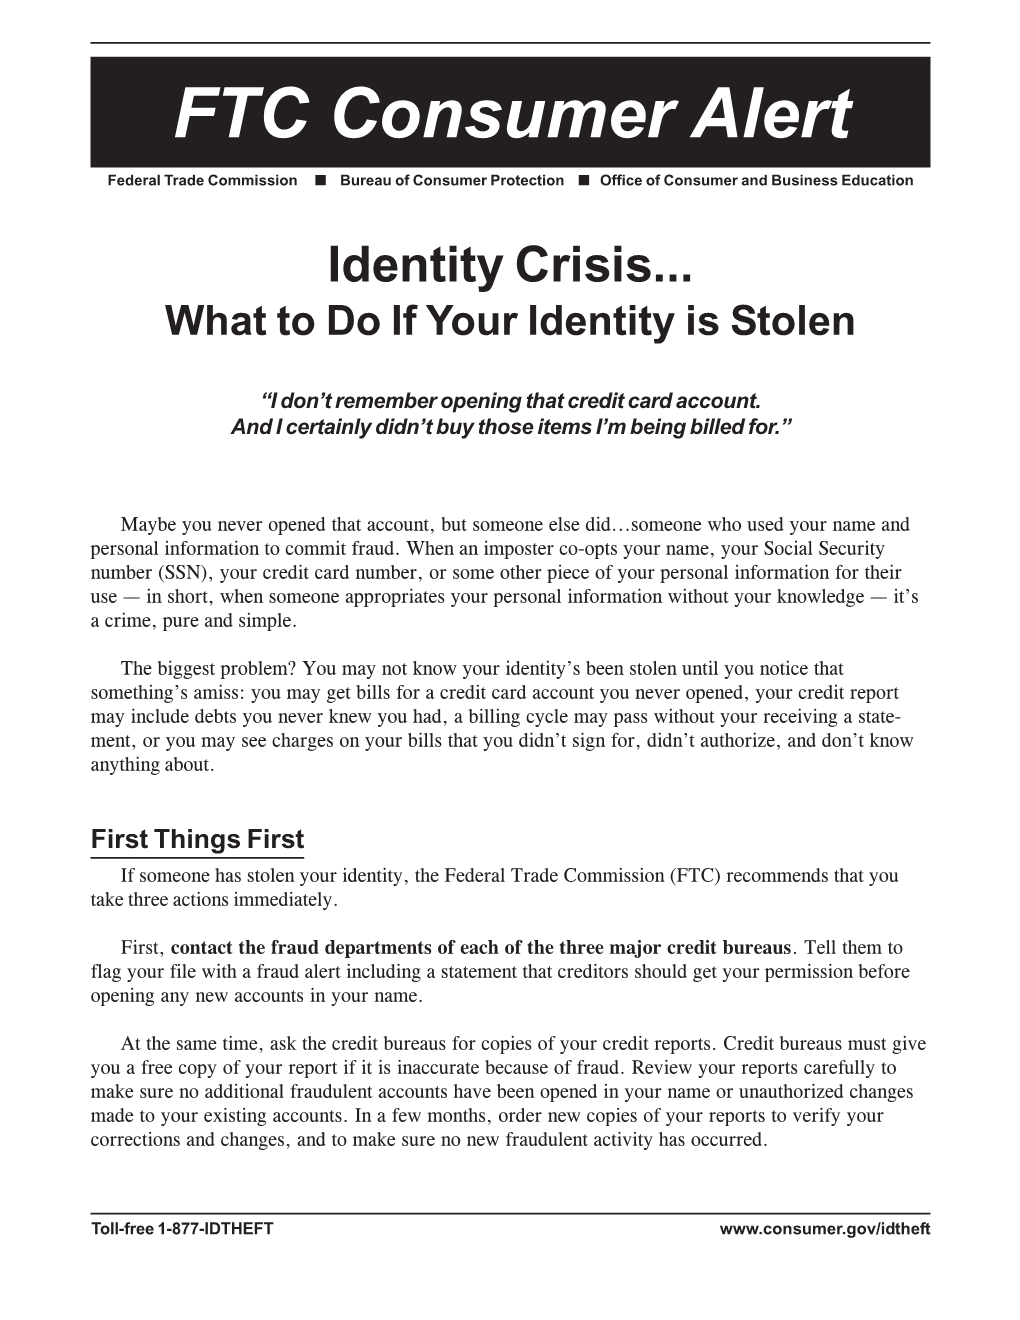 FTC Consumer Alert What to Do If Your Identity Is Stolen